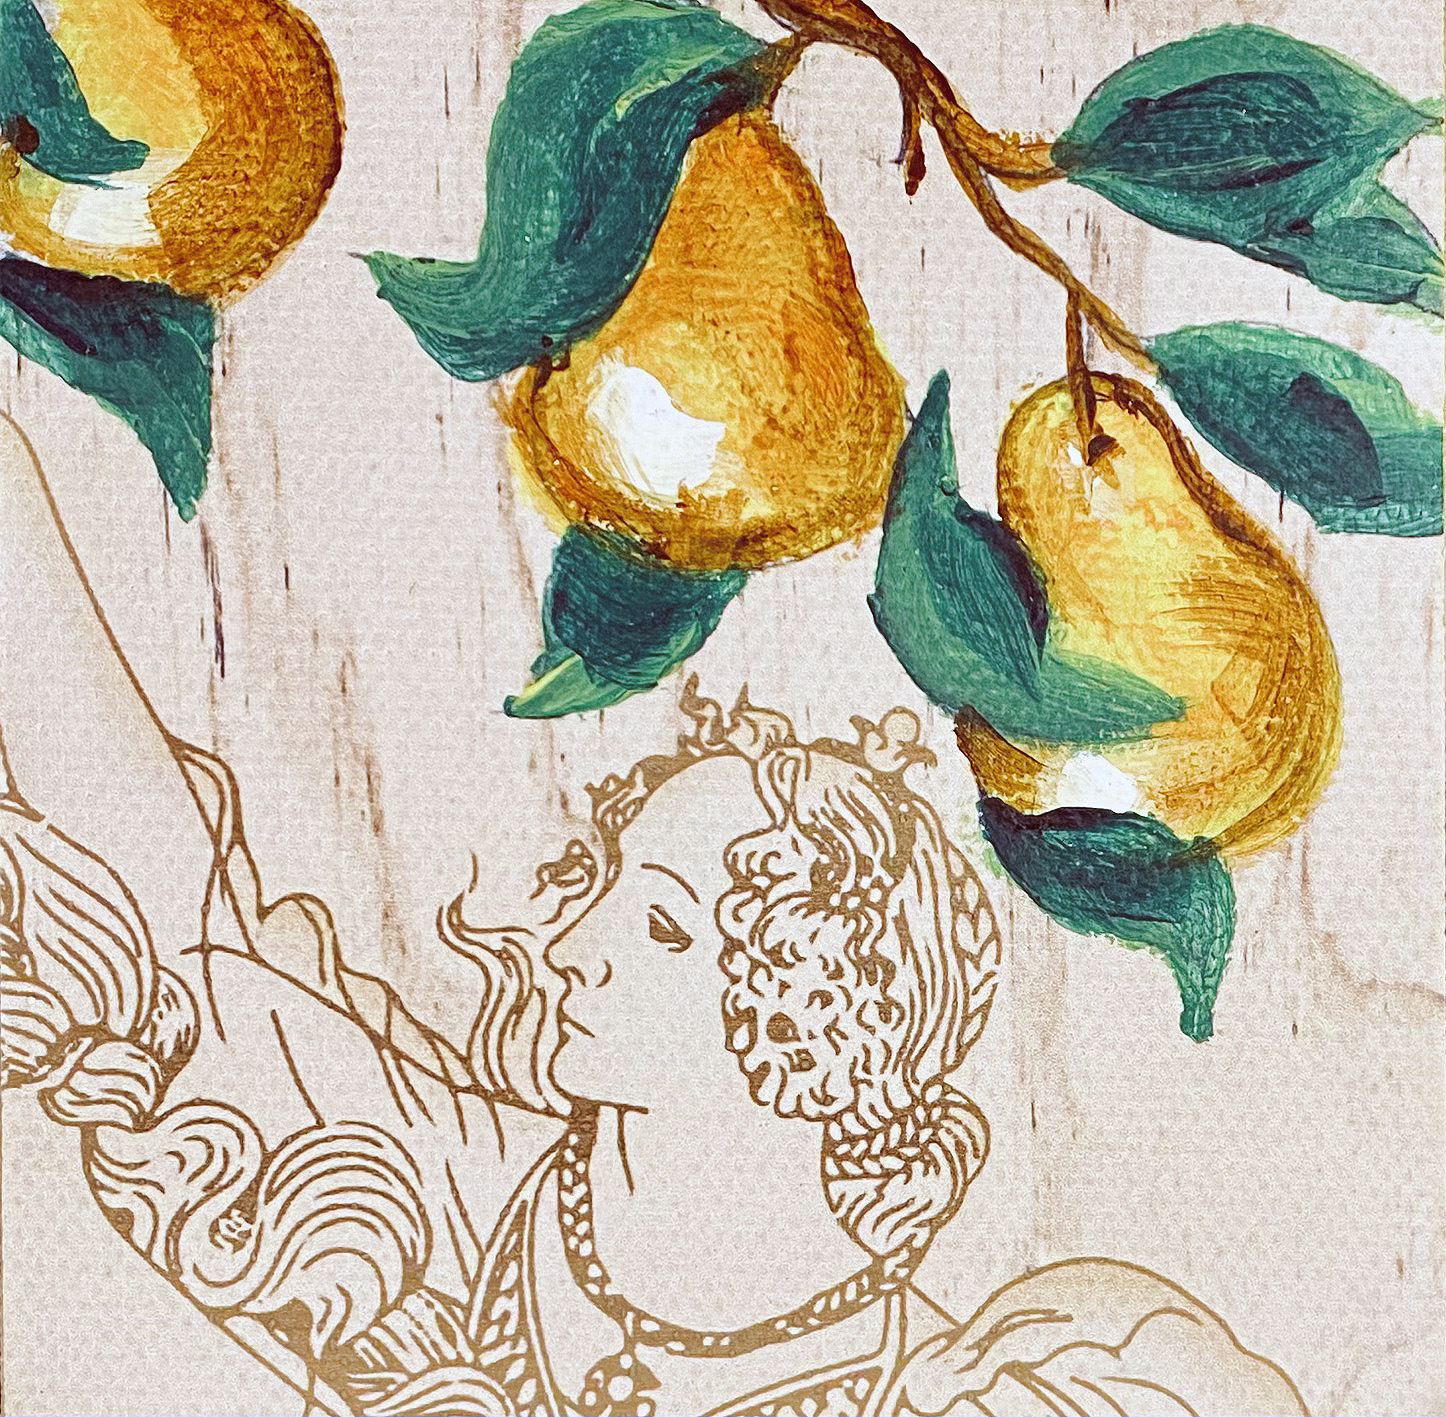 Pears with Maidens TR 001